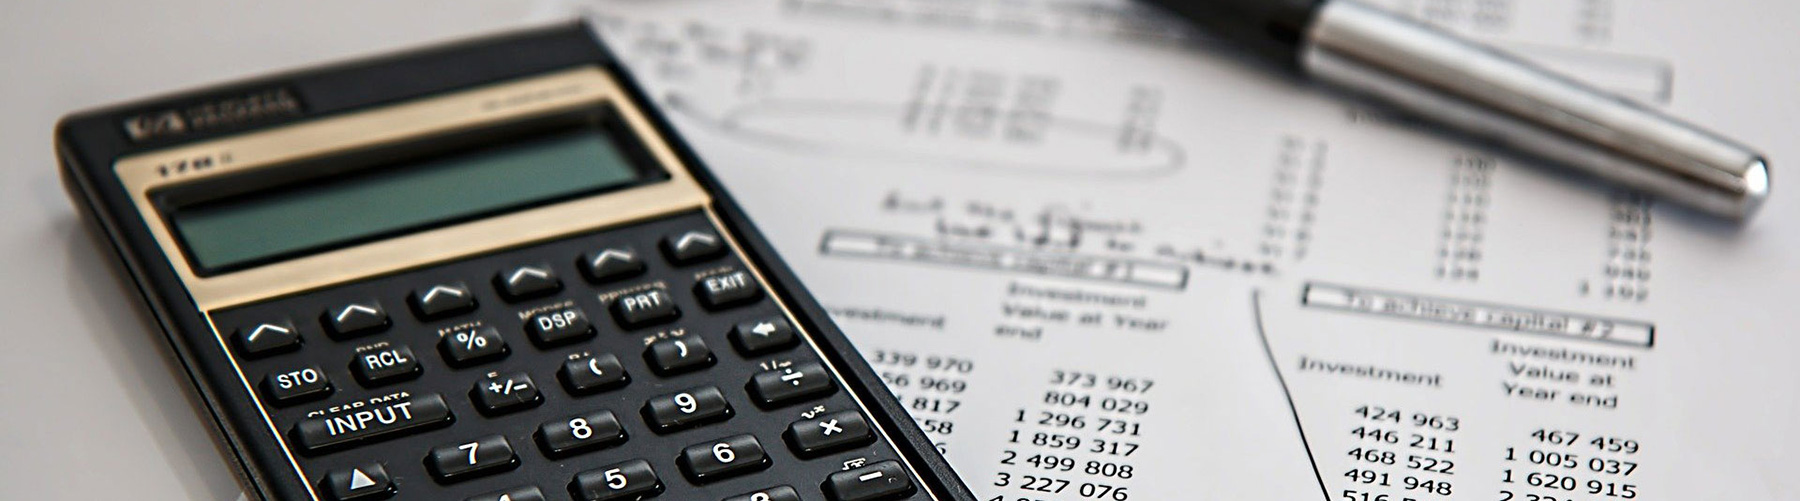 Calculator on a financial document with a pen